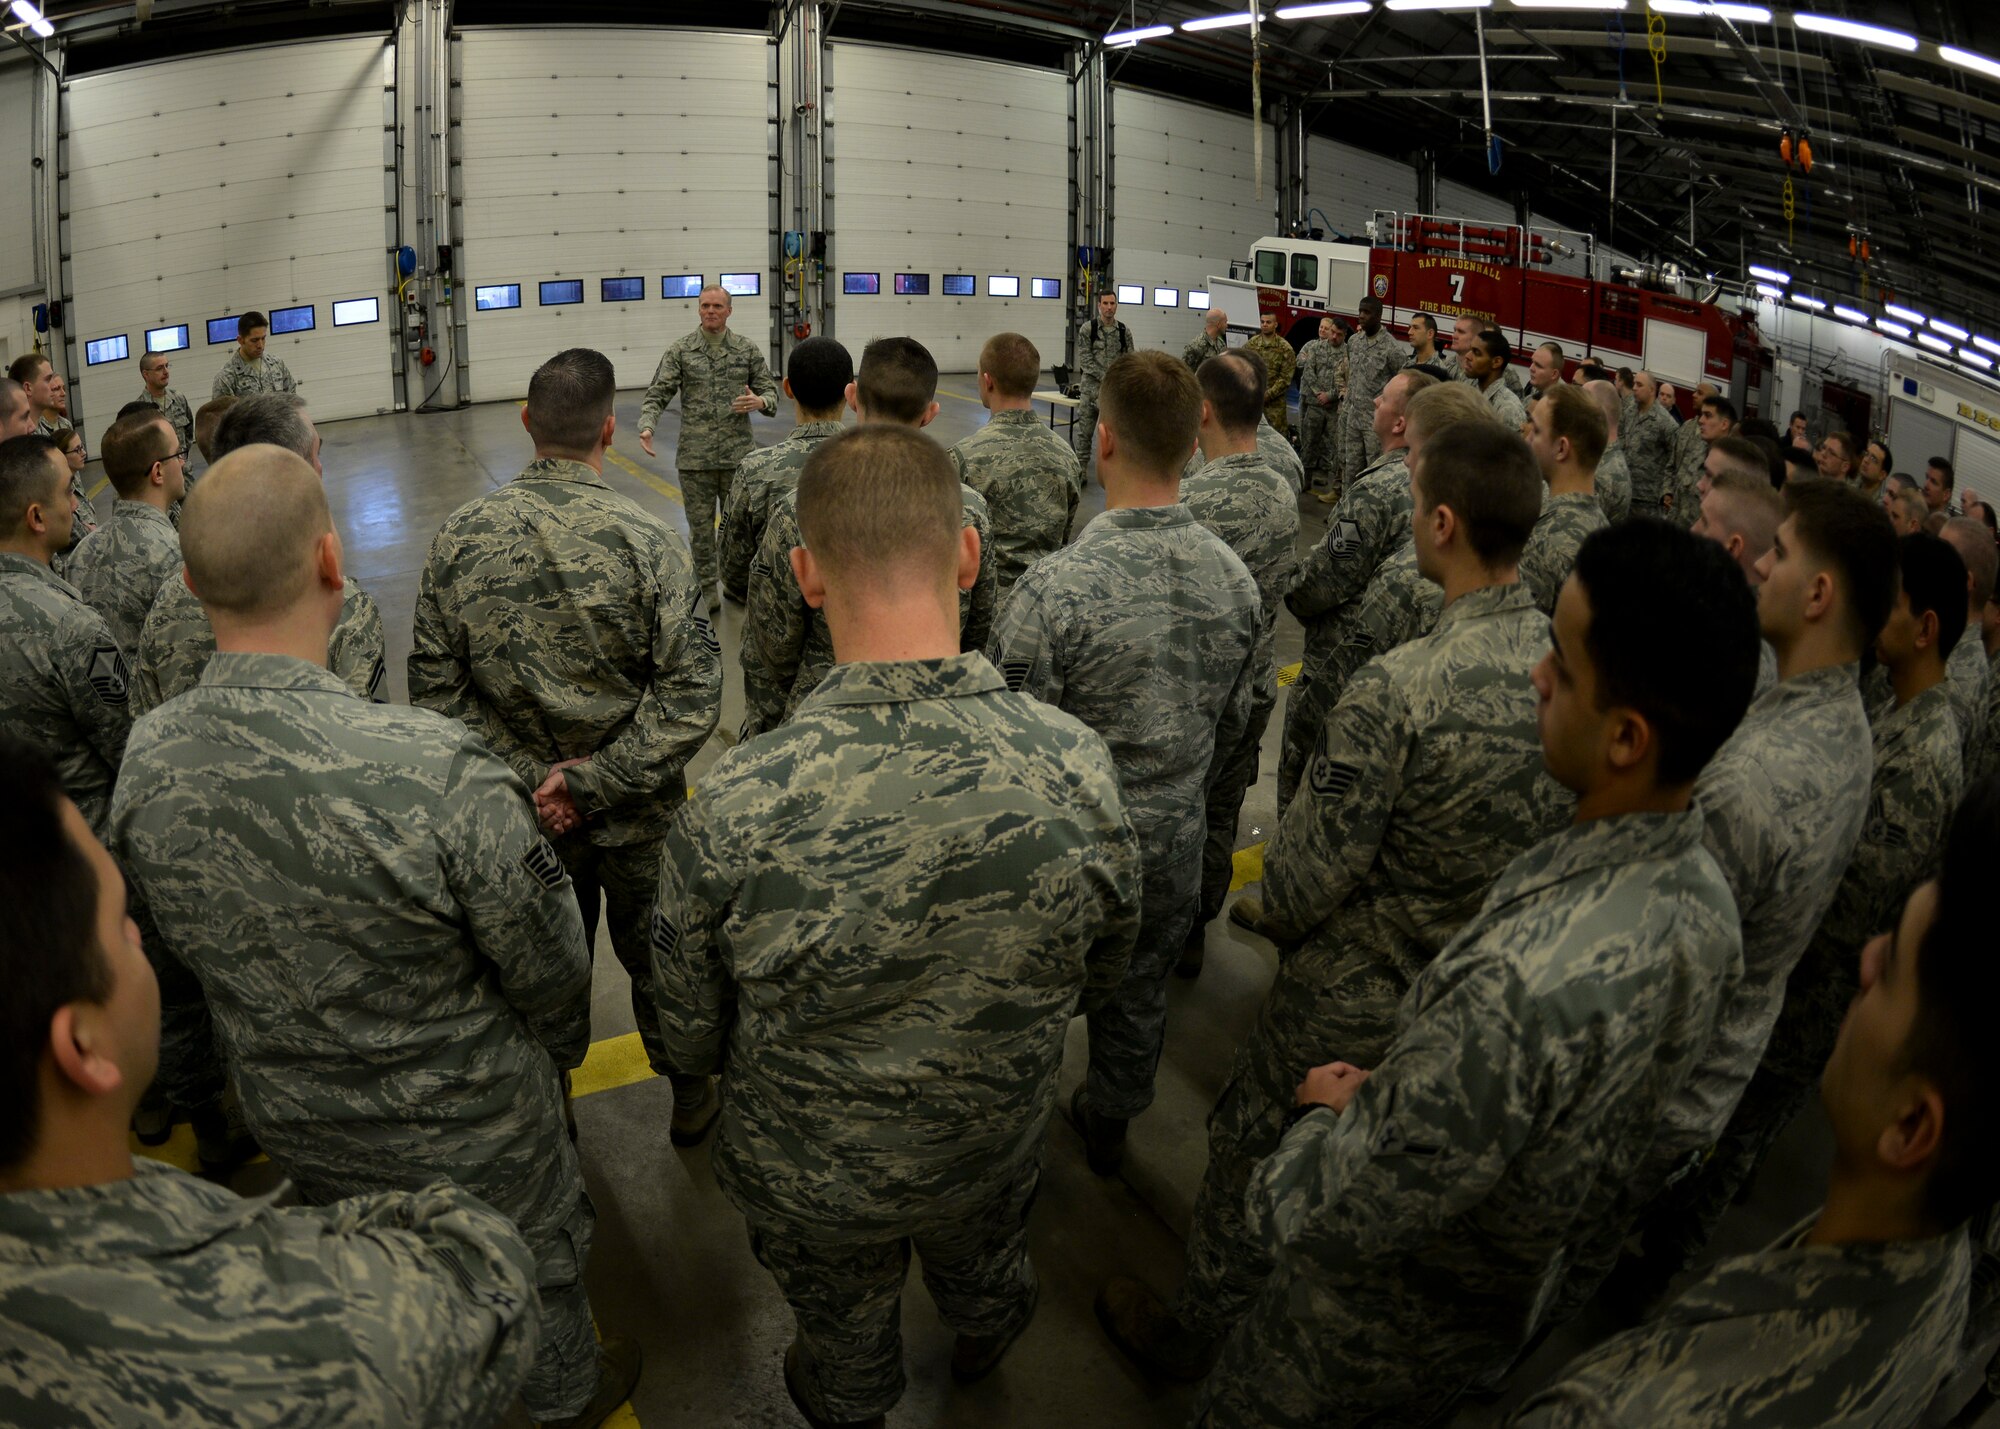 Chief Master Sgt. of the Air Force James Cody speaks with members of the 100th Civil Engineer Squadron Jan. 28, 2016, on RAF Mildenhall, England. Throughout his two-day visit, Cody spoke directly to Airmen, addressing their concerns and questions about the future of the Air Force. (U.S. Air Force photo by Senior Airman Victoria H. Taylor/Released)